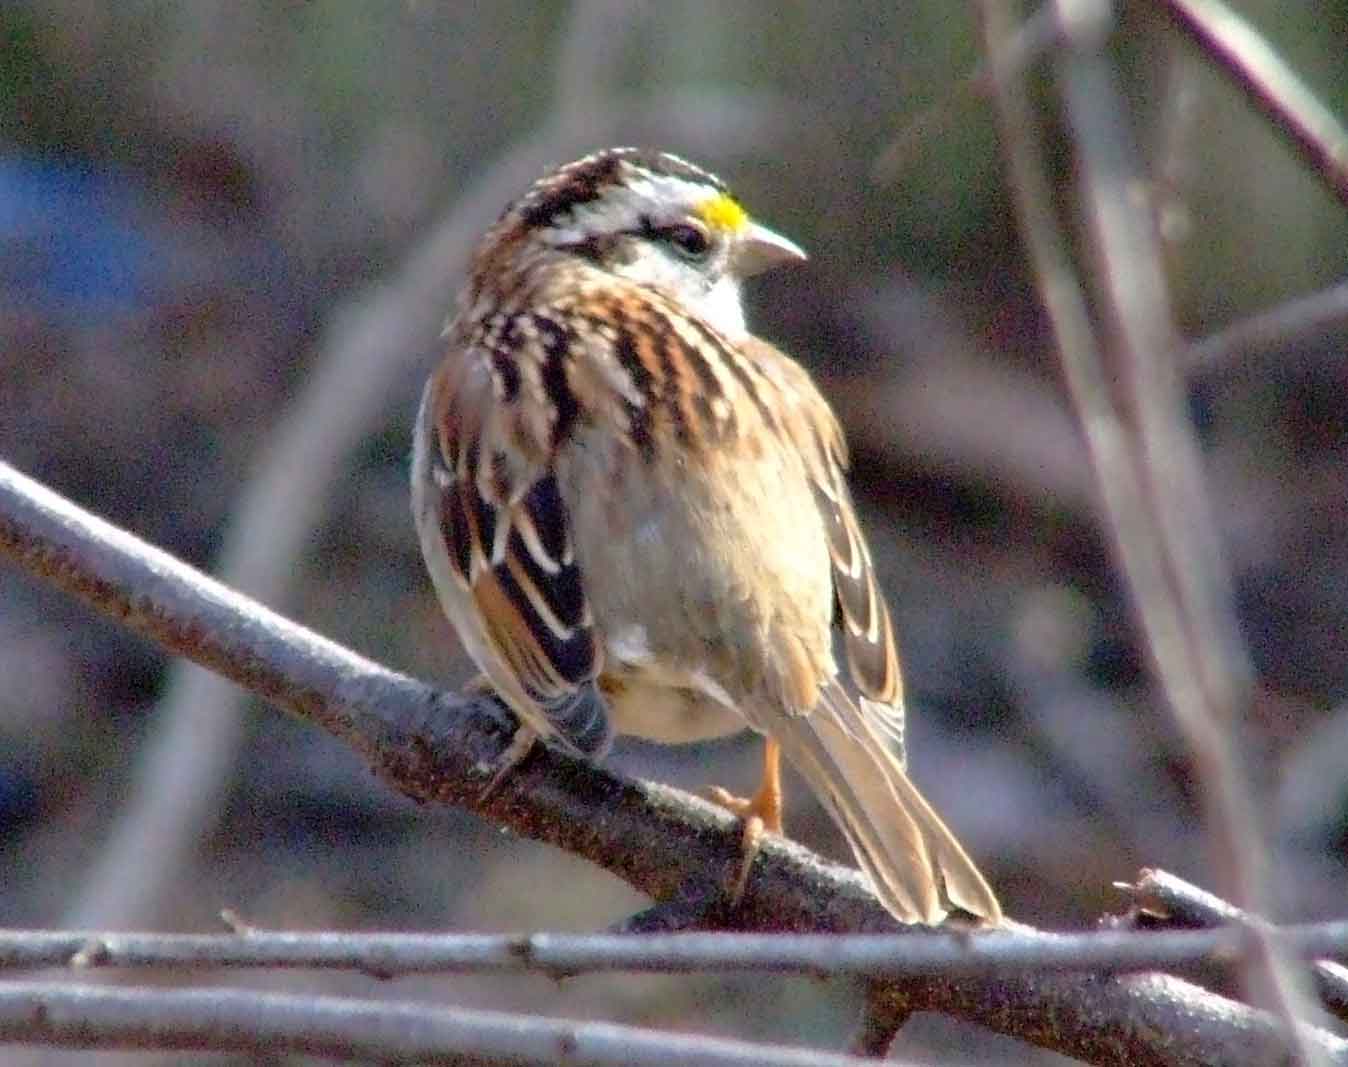 bird watching, C and O Canal, DC, Dick Maley, display, Fuji Digital Camera S9600, Hughes Hollow, Hunting Quarter Road, Marsh, Maryland, MD, Montgomery County, North America, photography, Poolesville, Potomac, Richard Maley, river, USA, Washington, Wetlands, Google Images, White-throated Sparrow